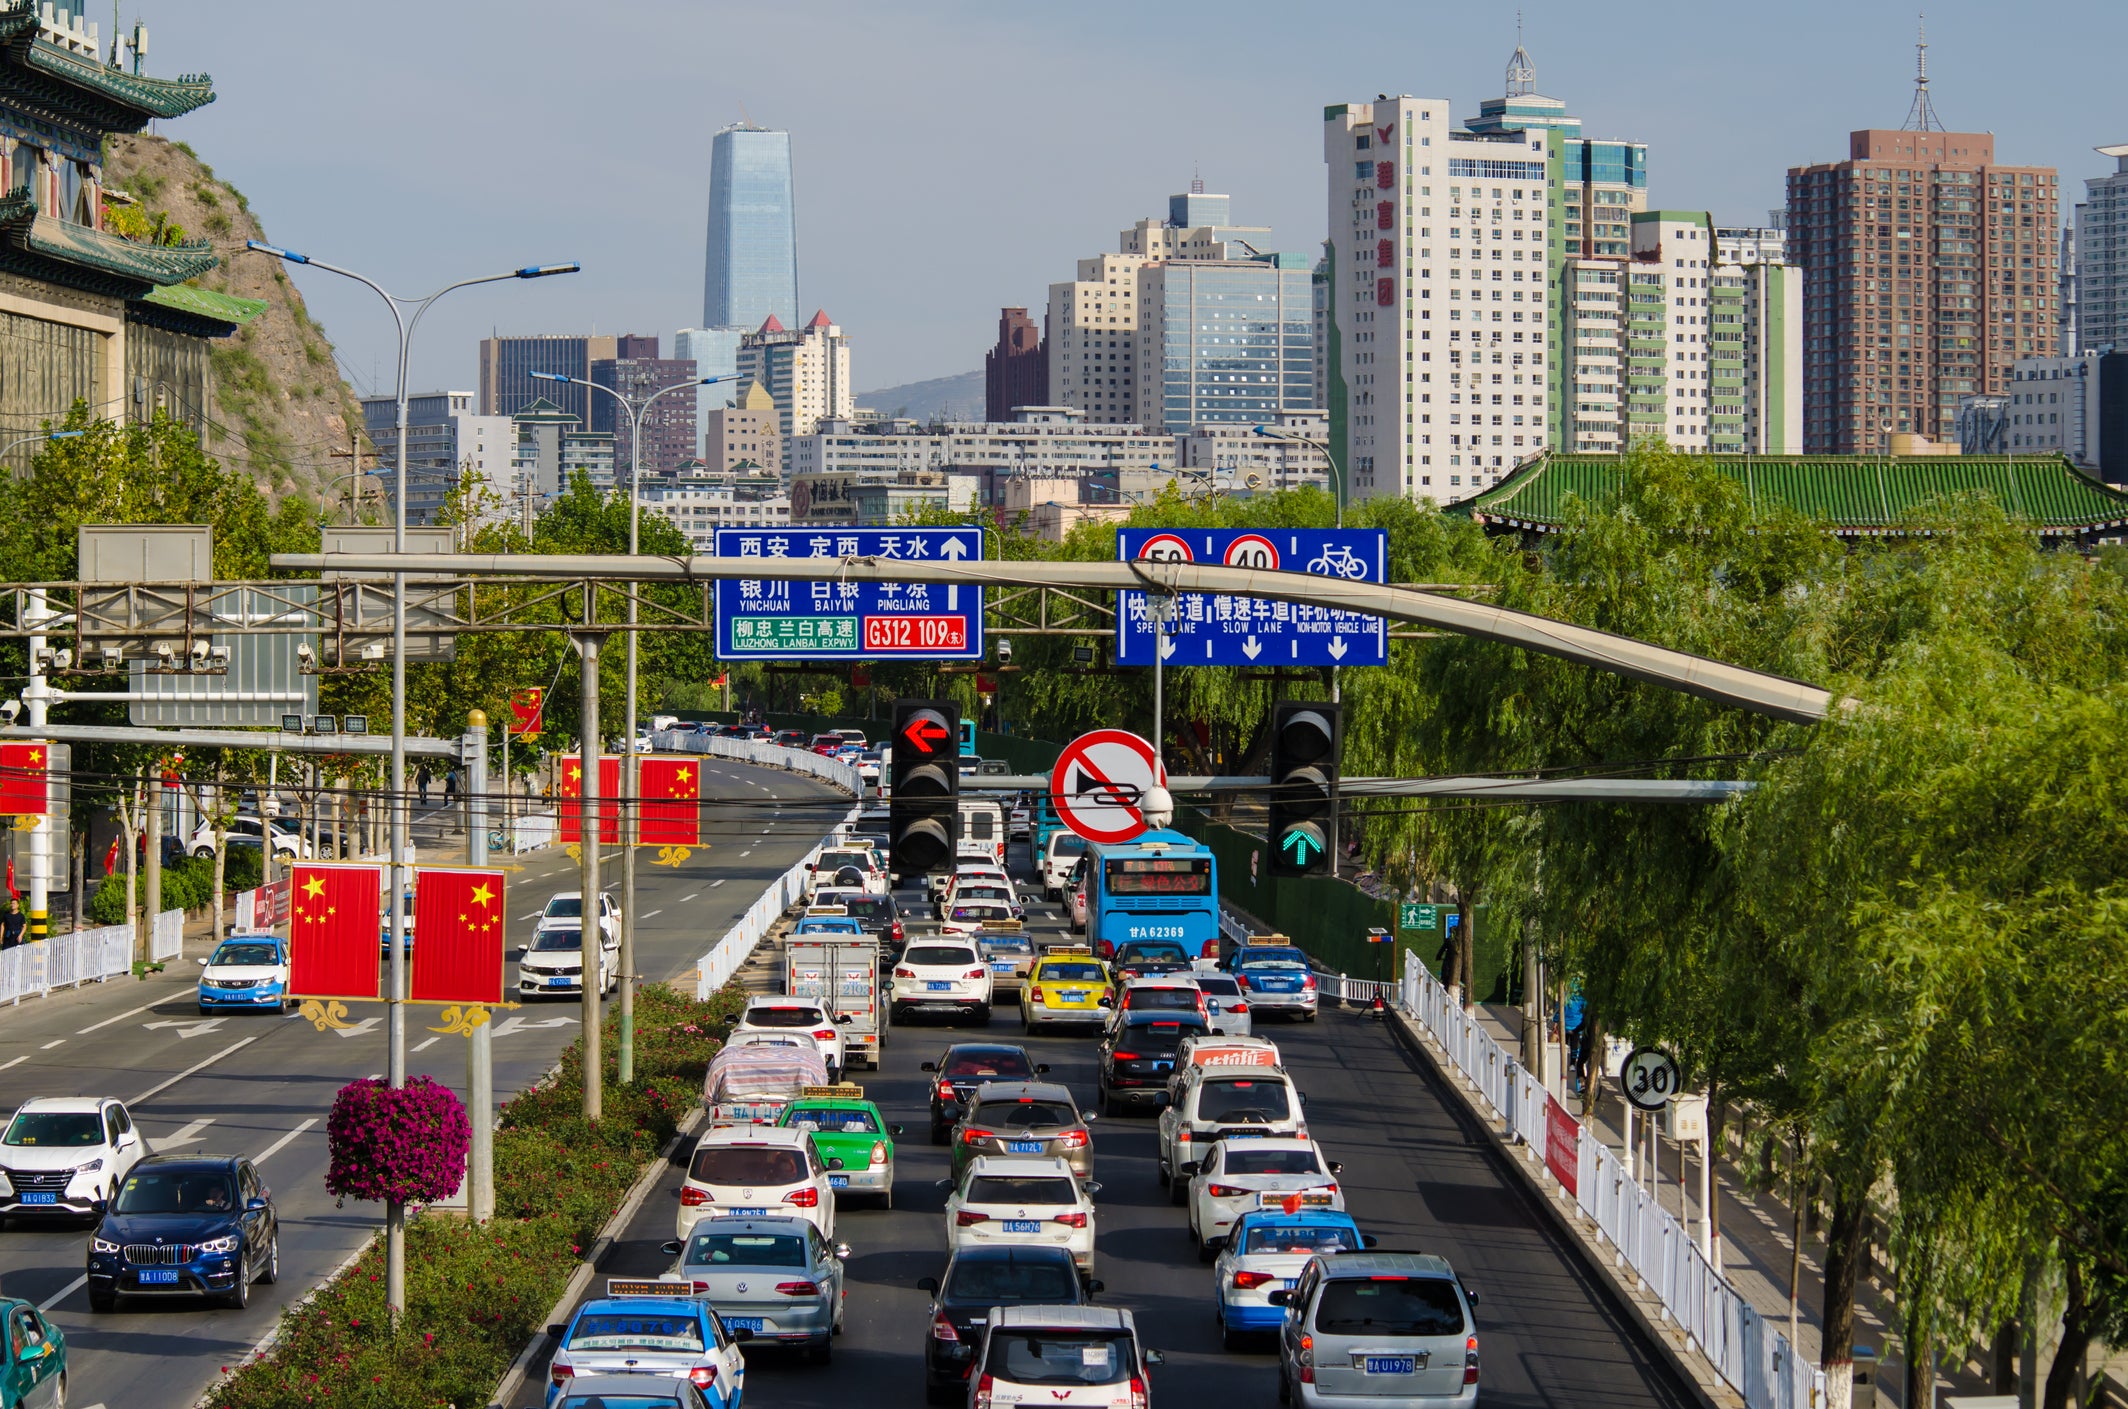 A traffic jam in Lanzhou on the Silk Road